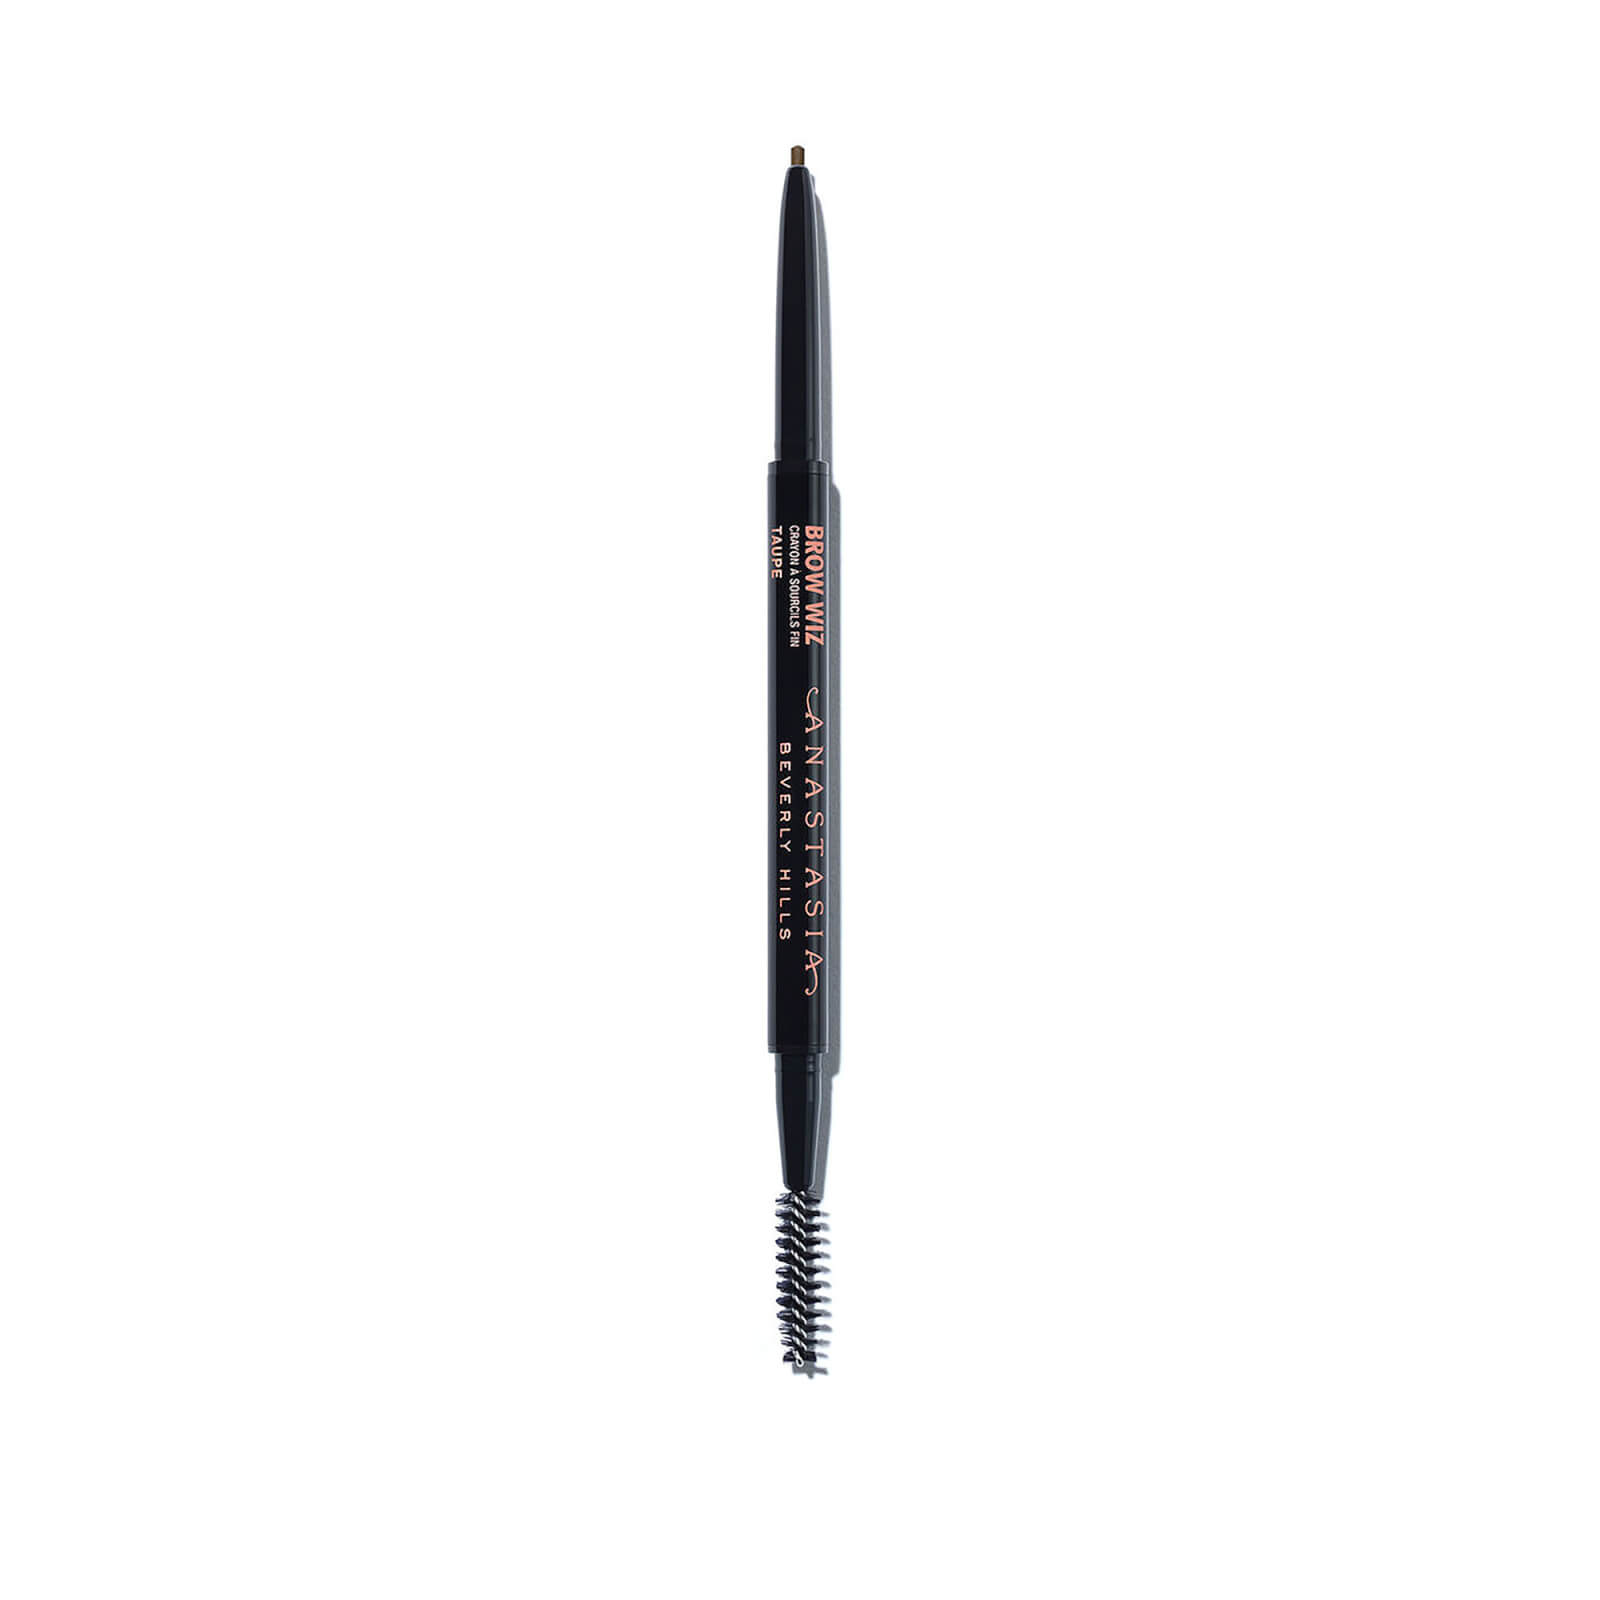 Image of Anastasia Beverly Hills Brow Wiz 0.08g (Various Shades) - Taupe